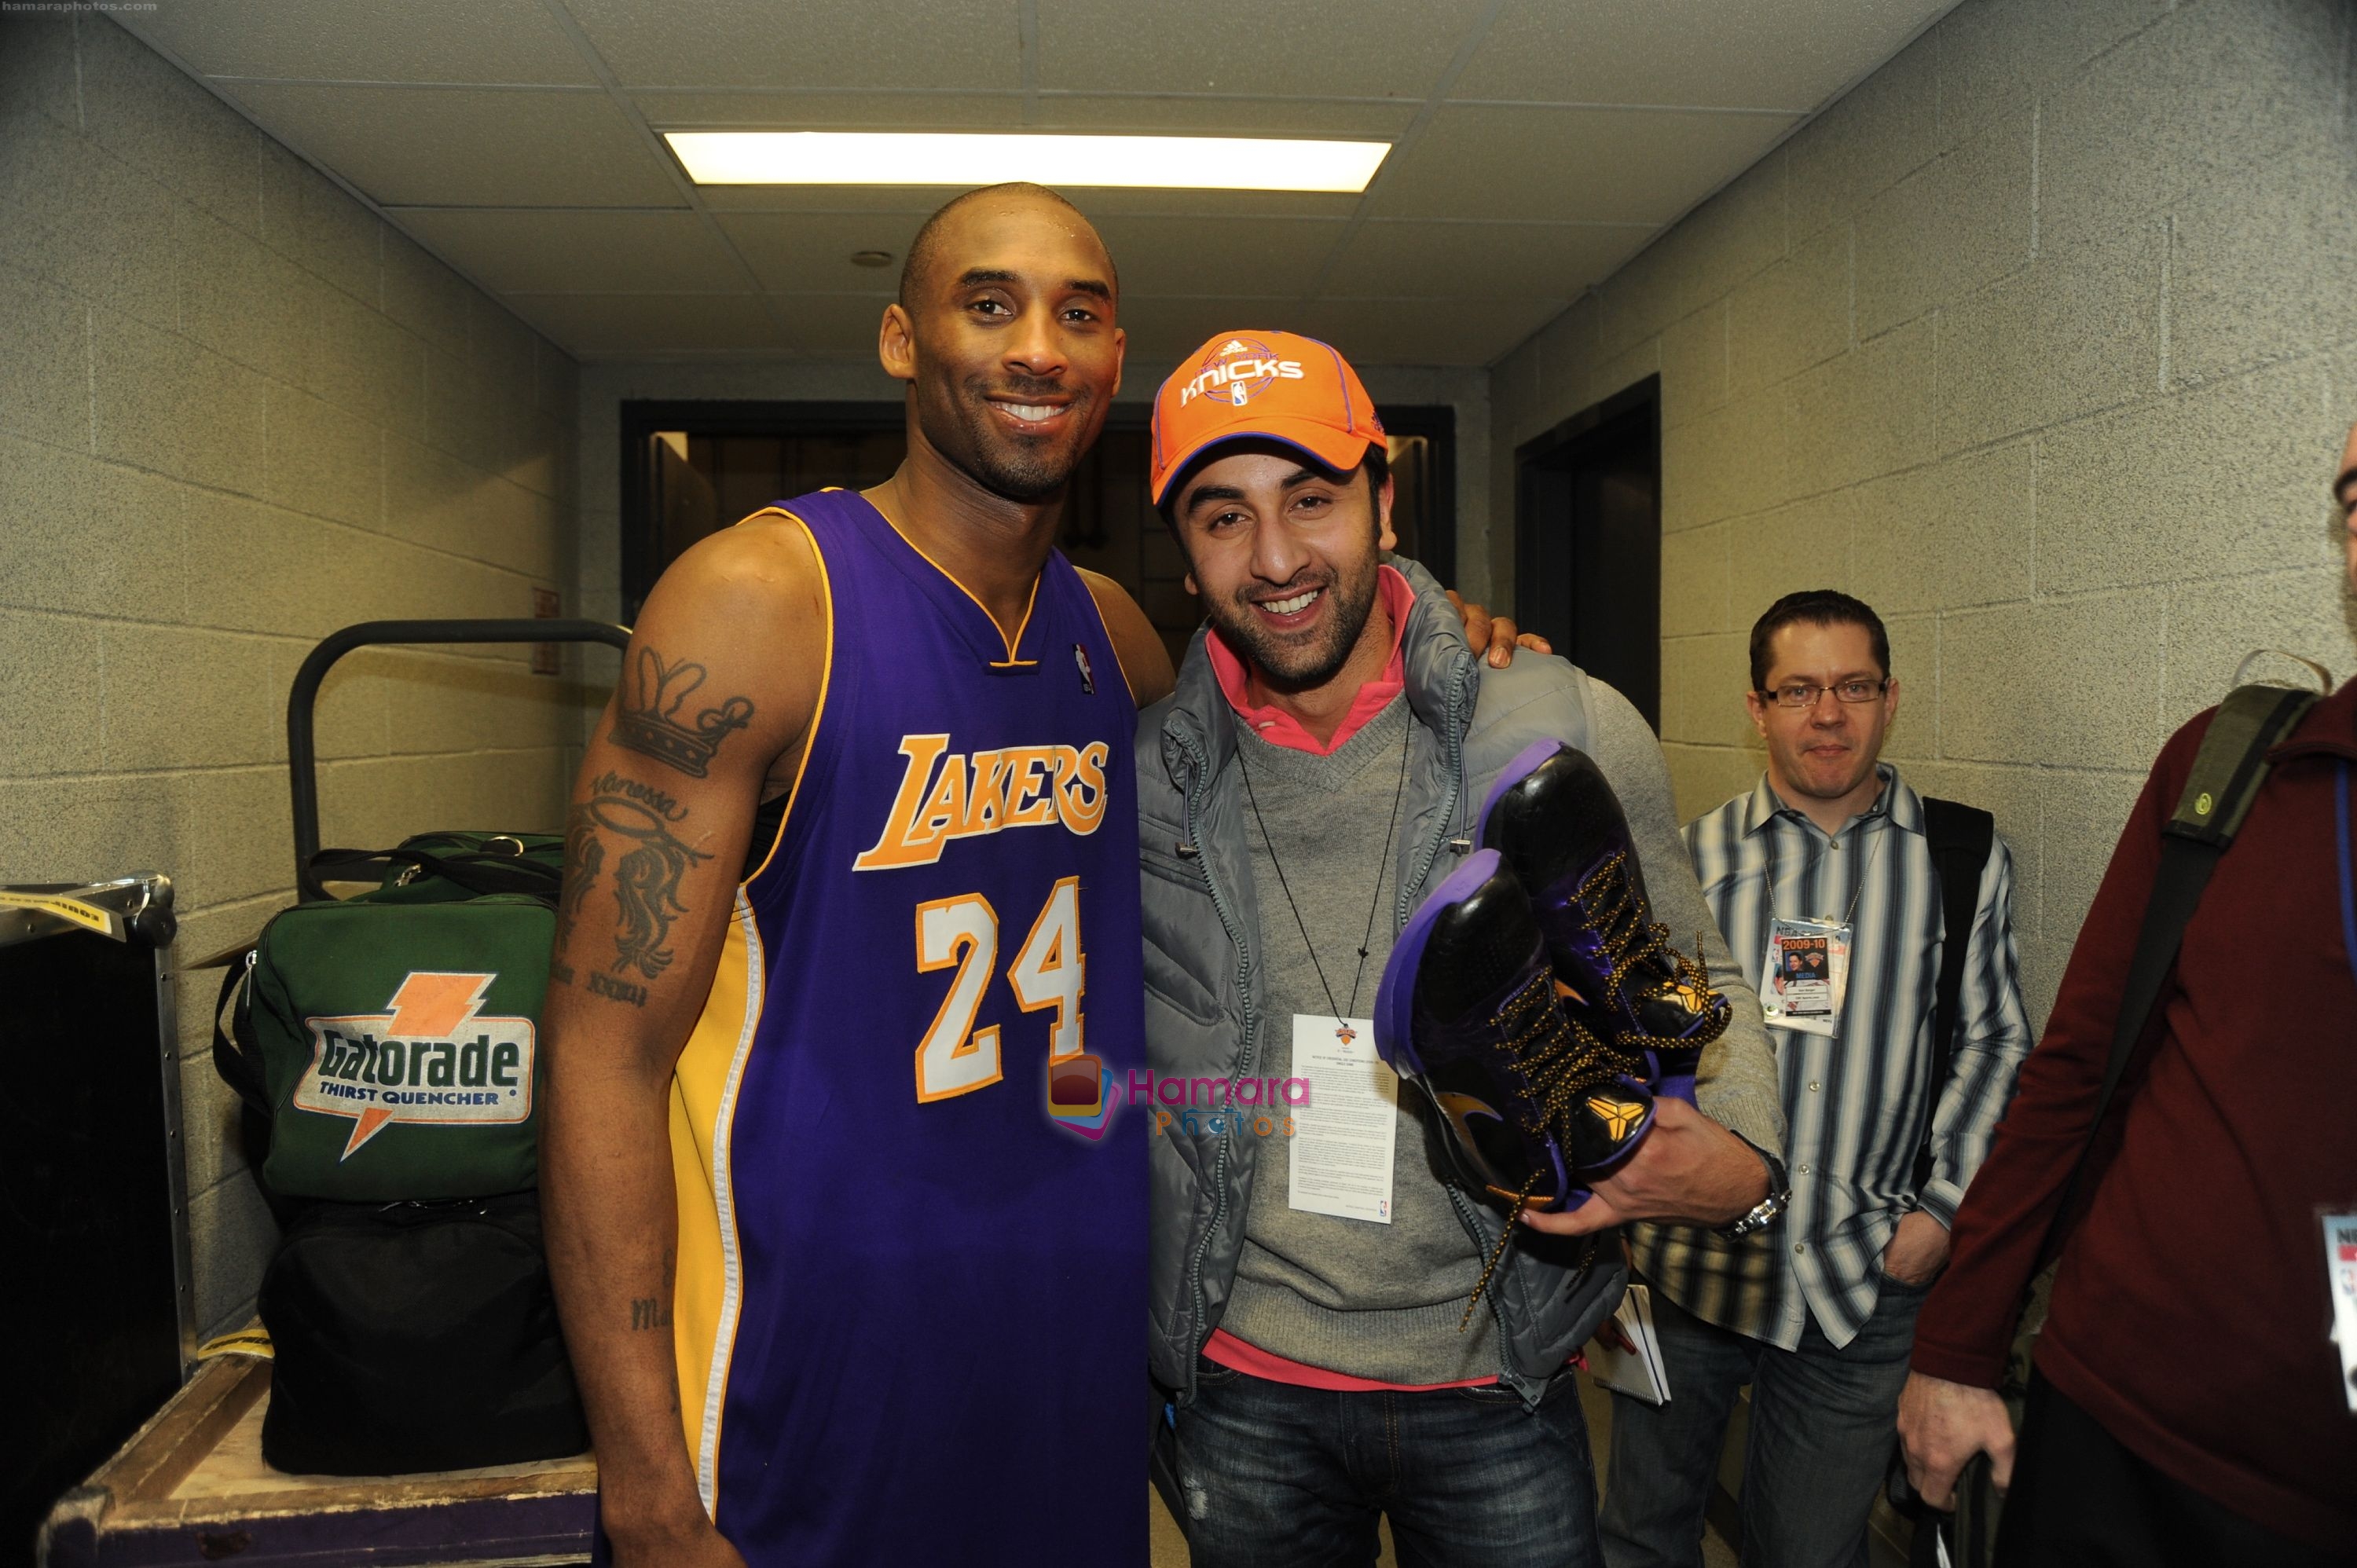 Ranbir Kapoor in New York visiting his athlete friends from the NBA on 22nd Jan 2010 